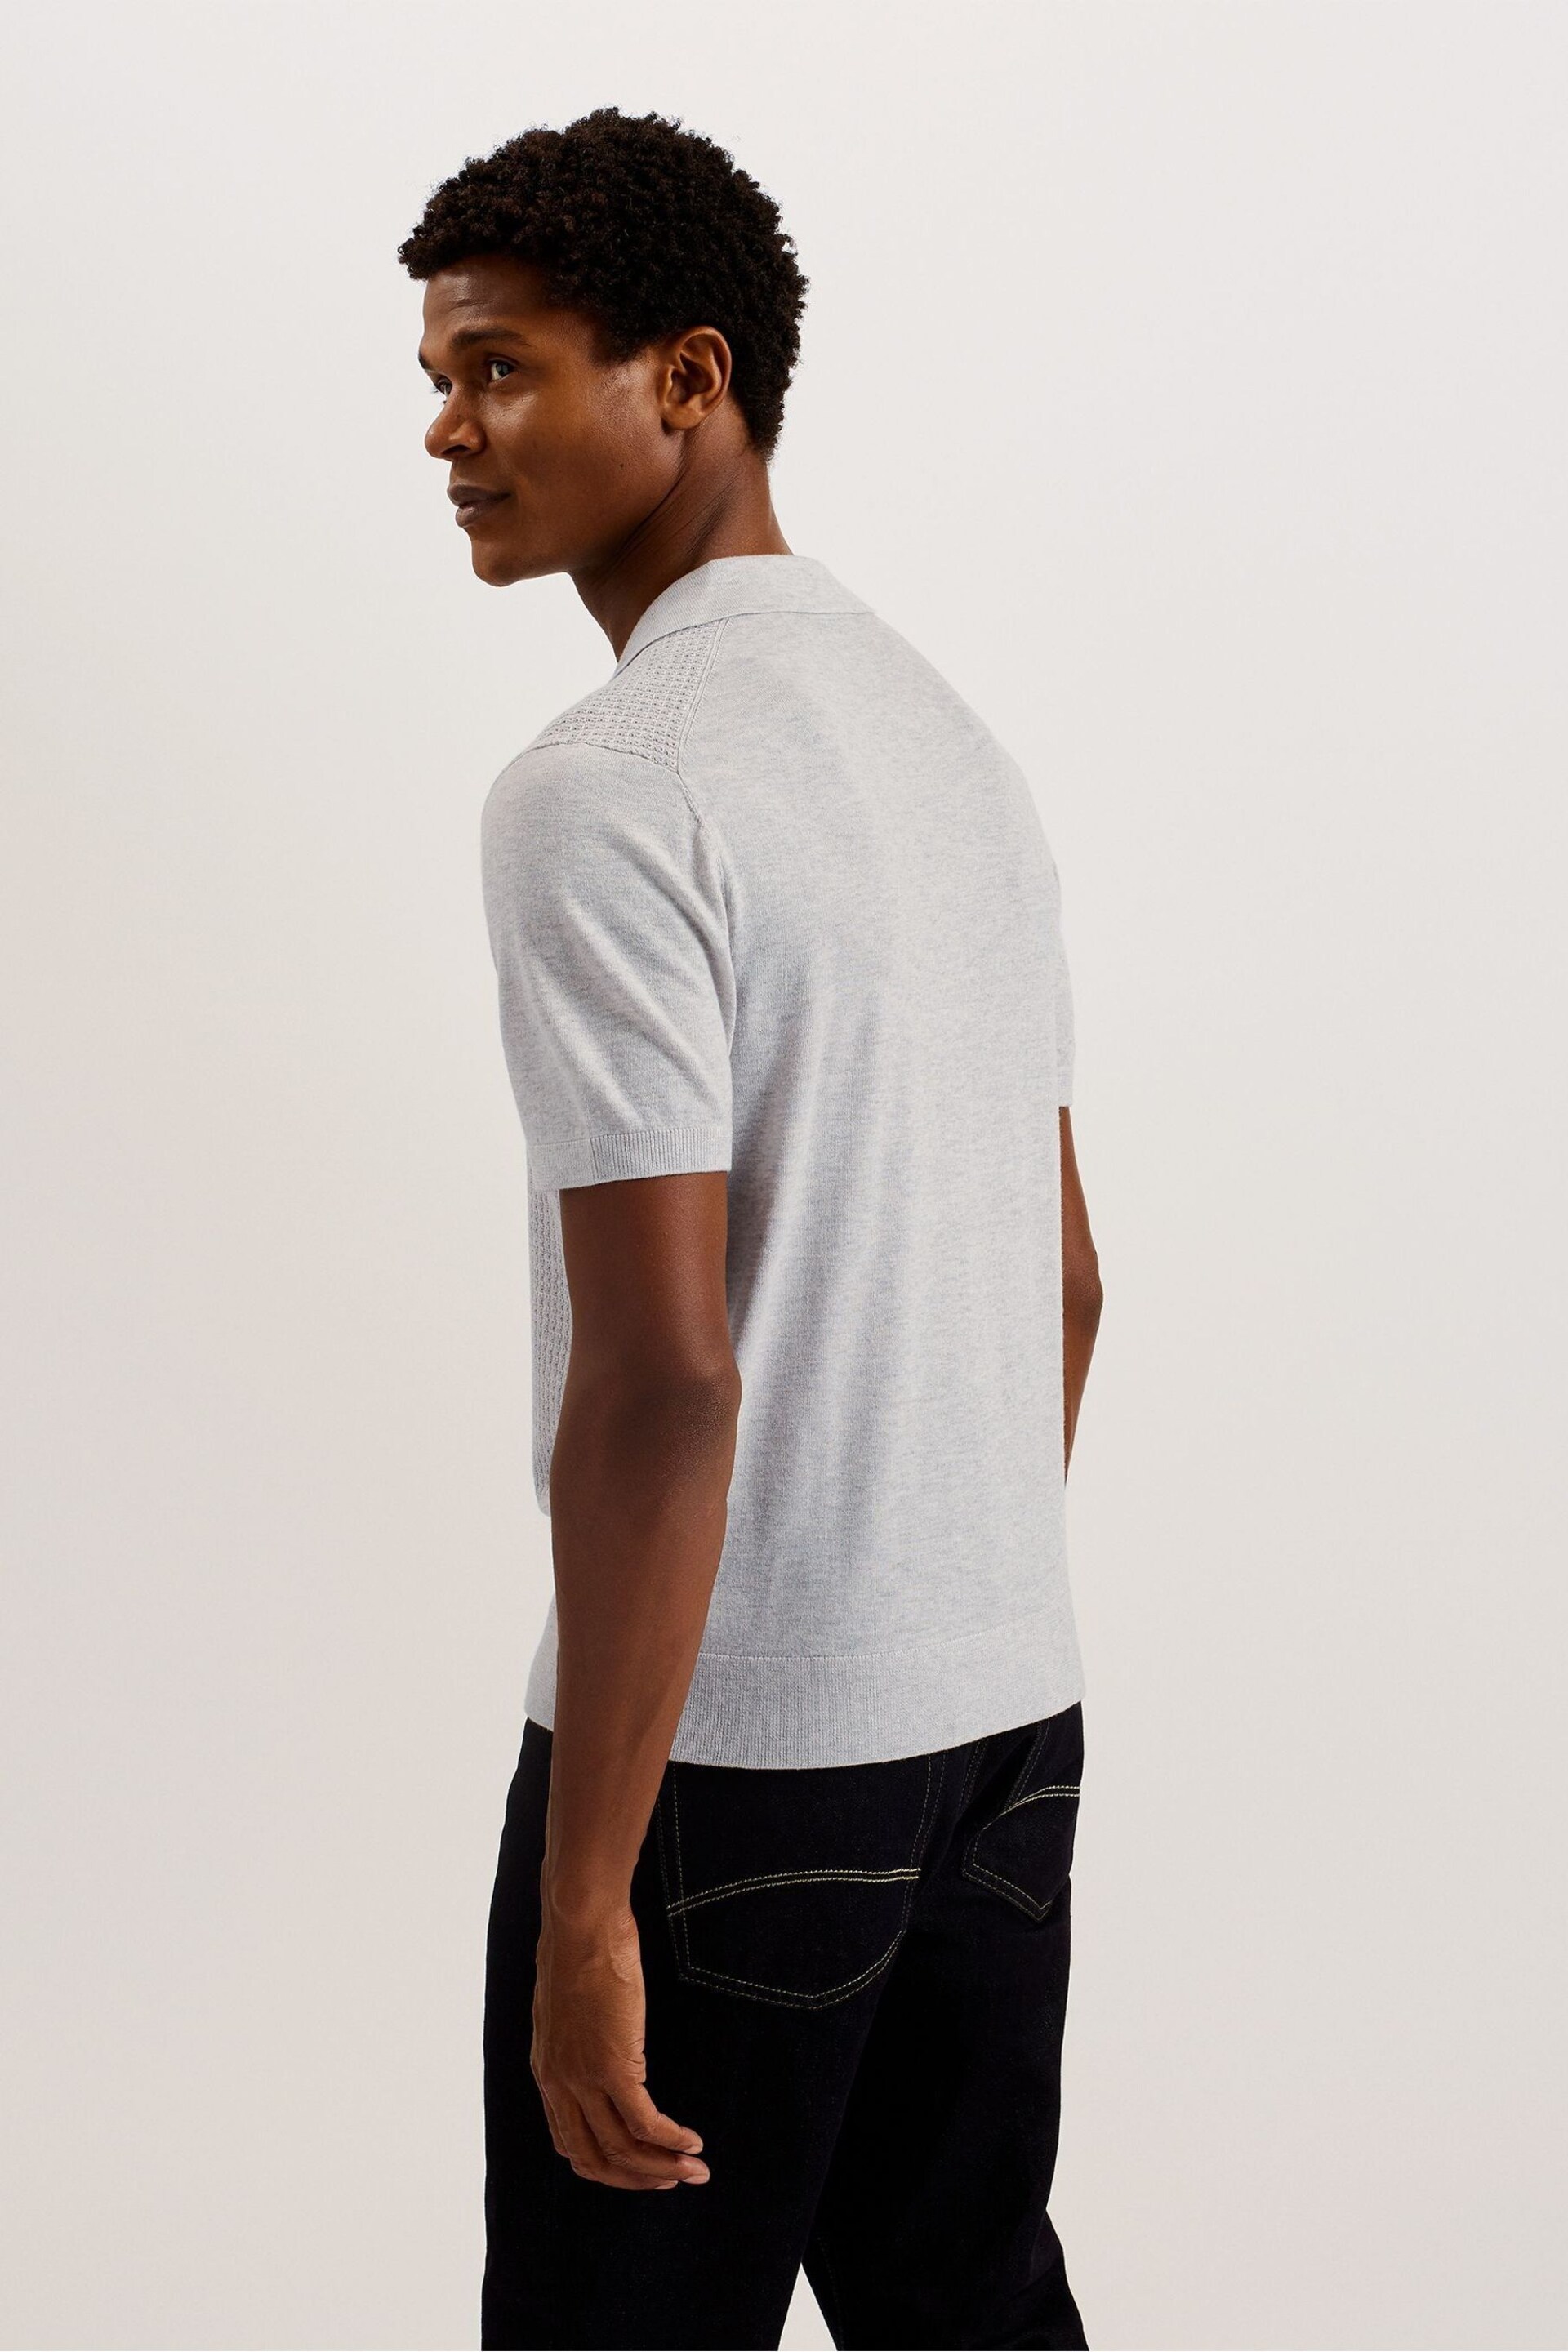 Ted Baker Grey Adio Textured Front Polo Shirt - Image 5 of 6